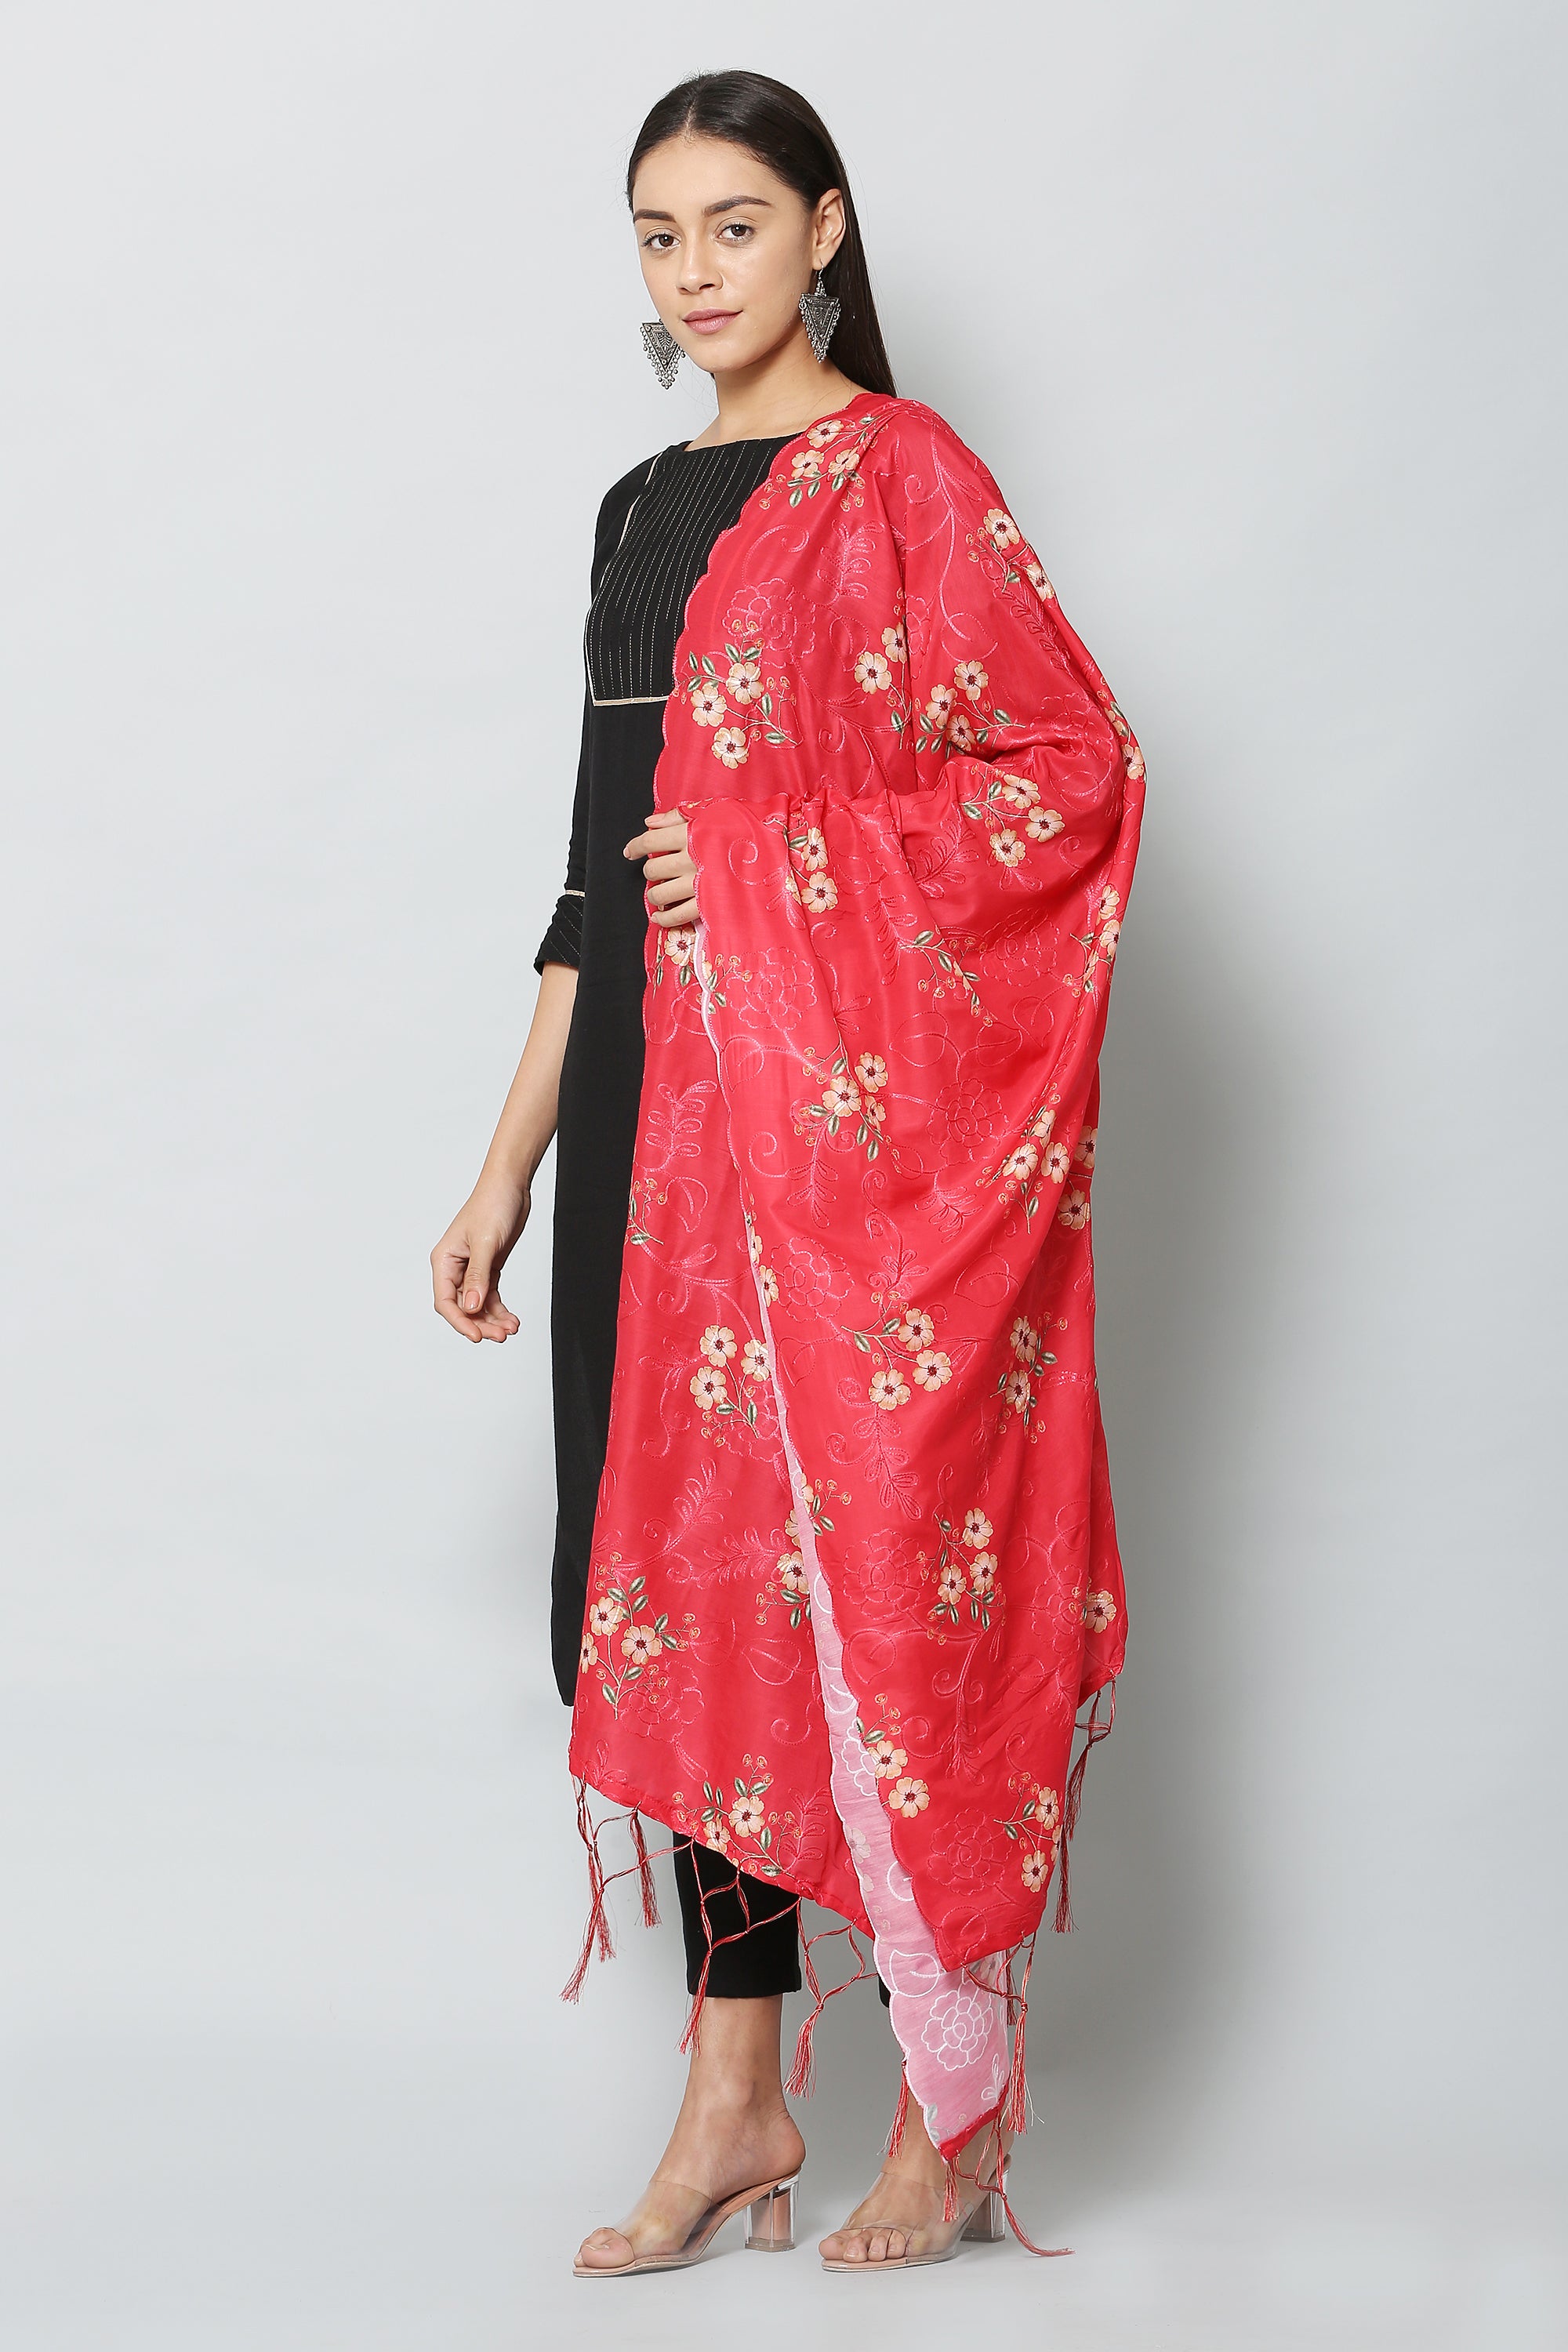 Women's Red Color Art Muslin Embroidery and Digital Printed Dupatta - VAABA